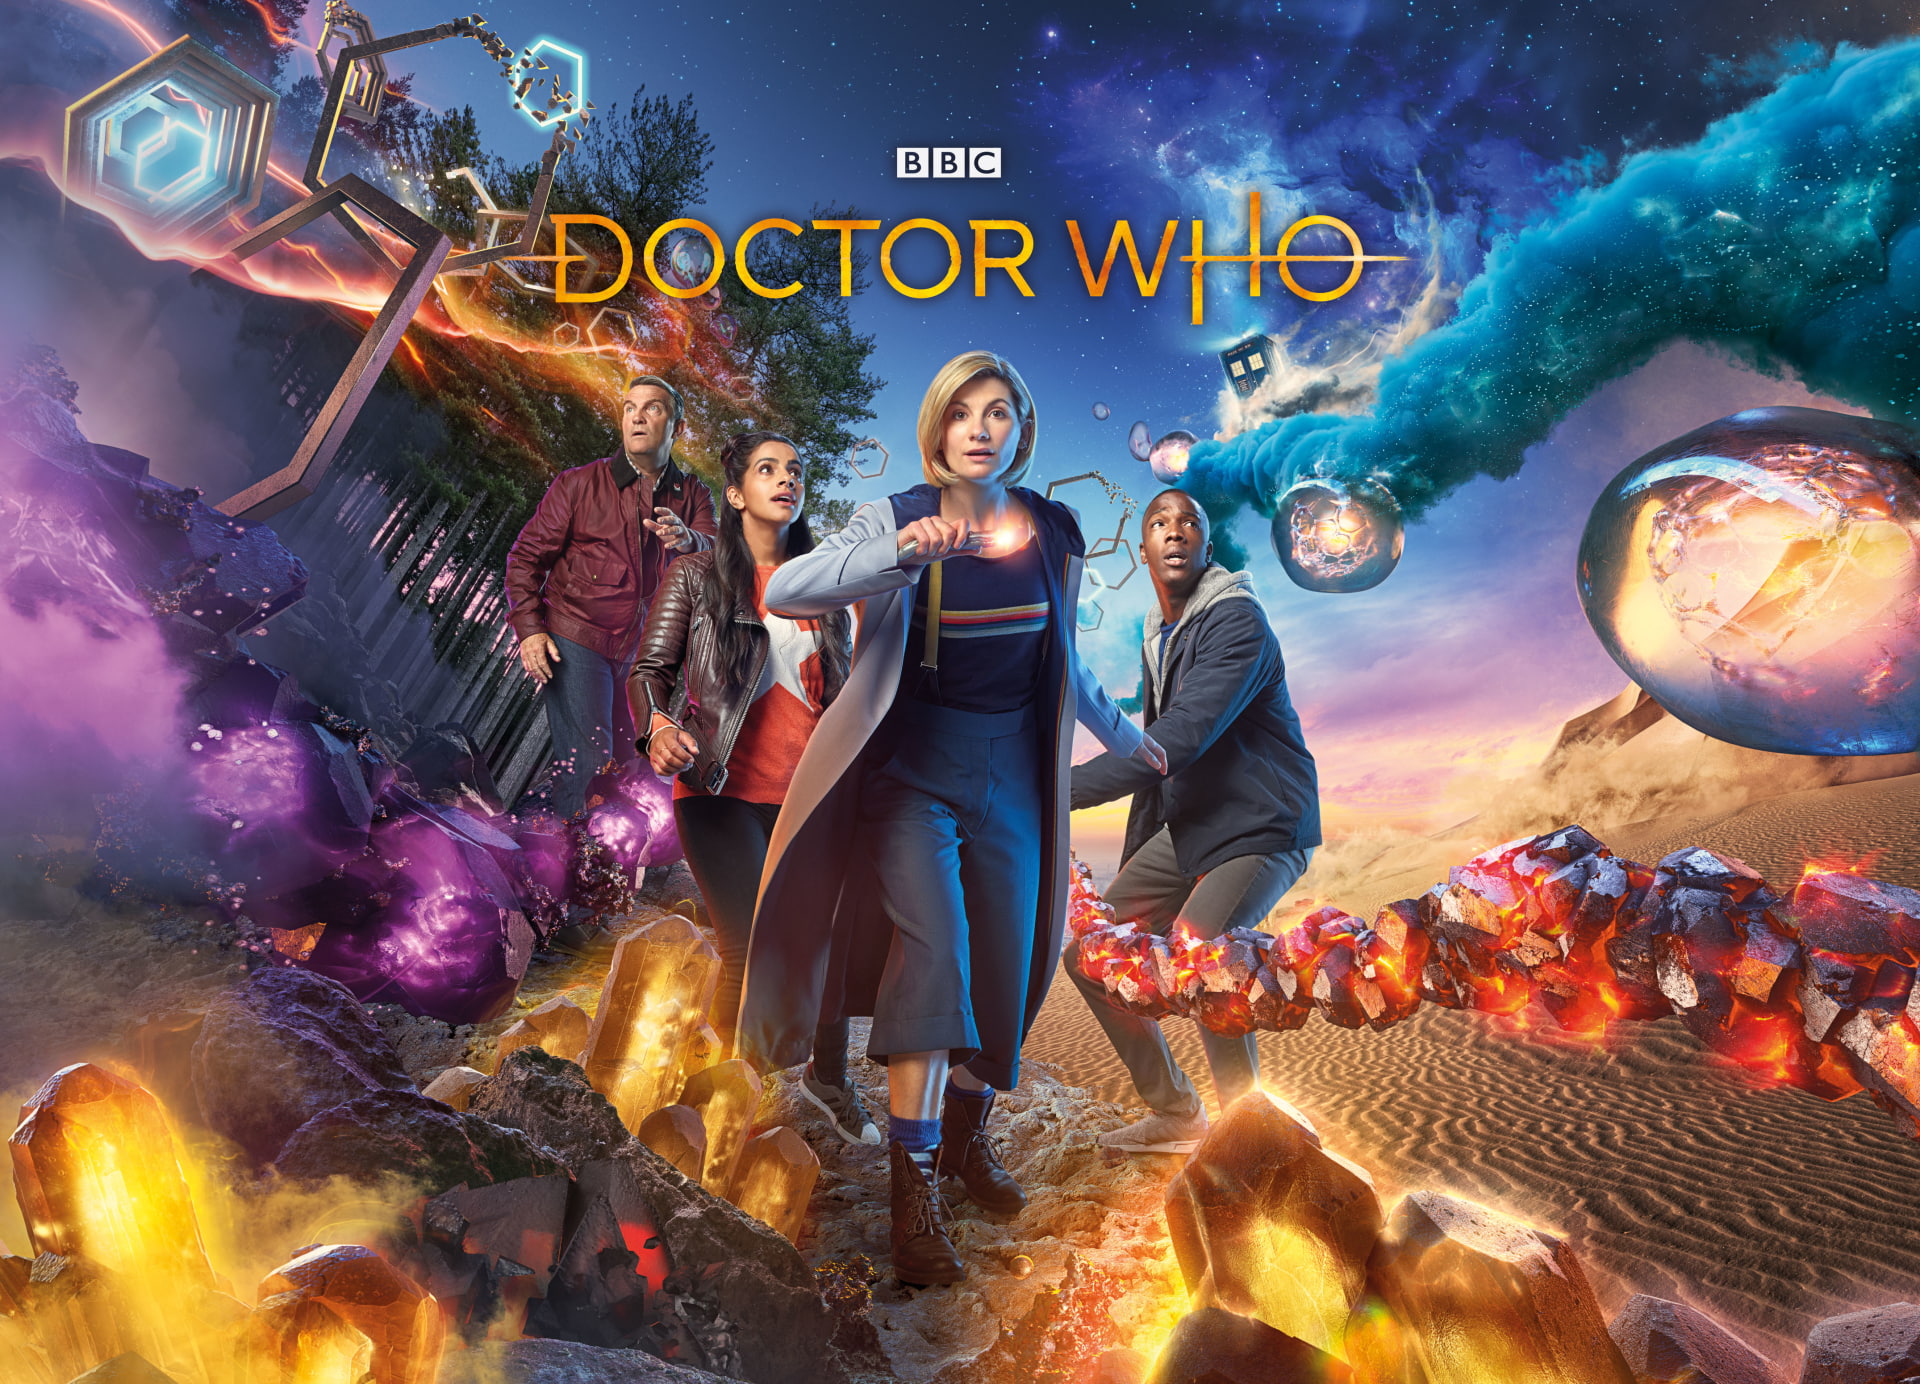 TV Show, Doctor Who, Jodie Whittaker